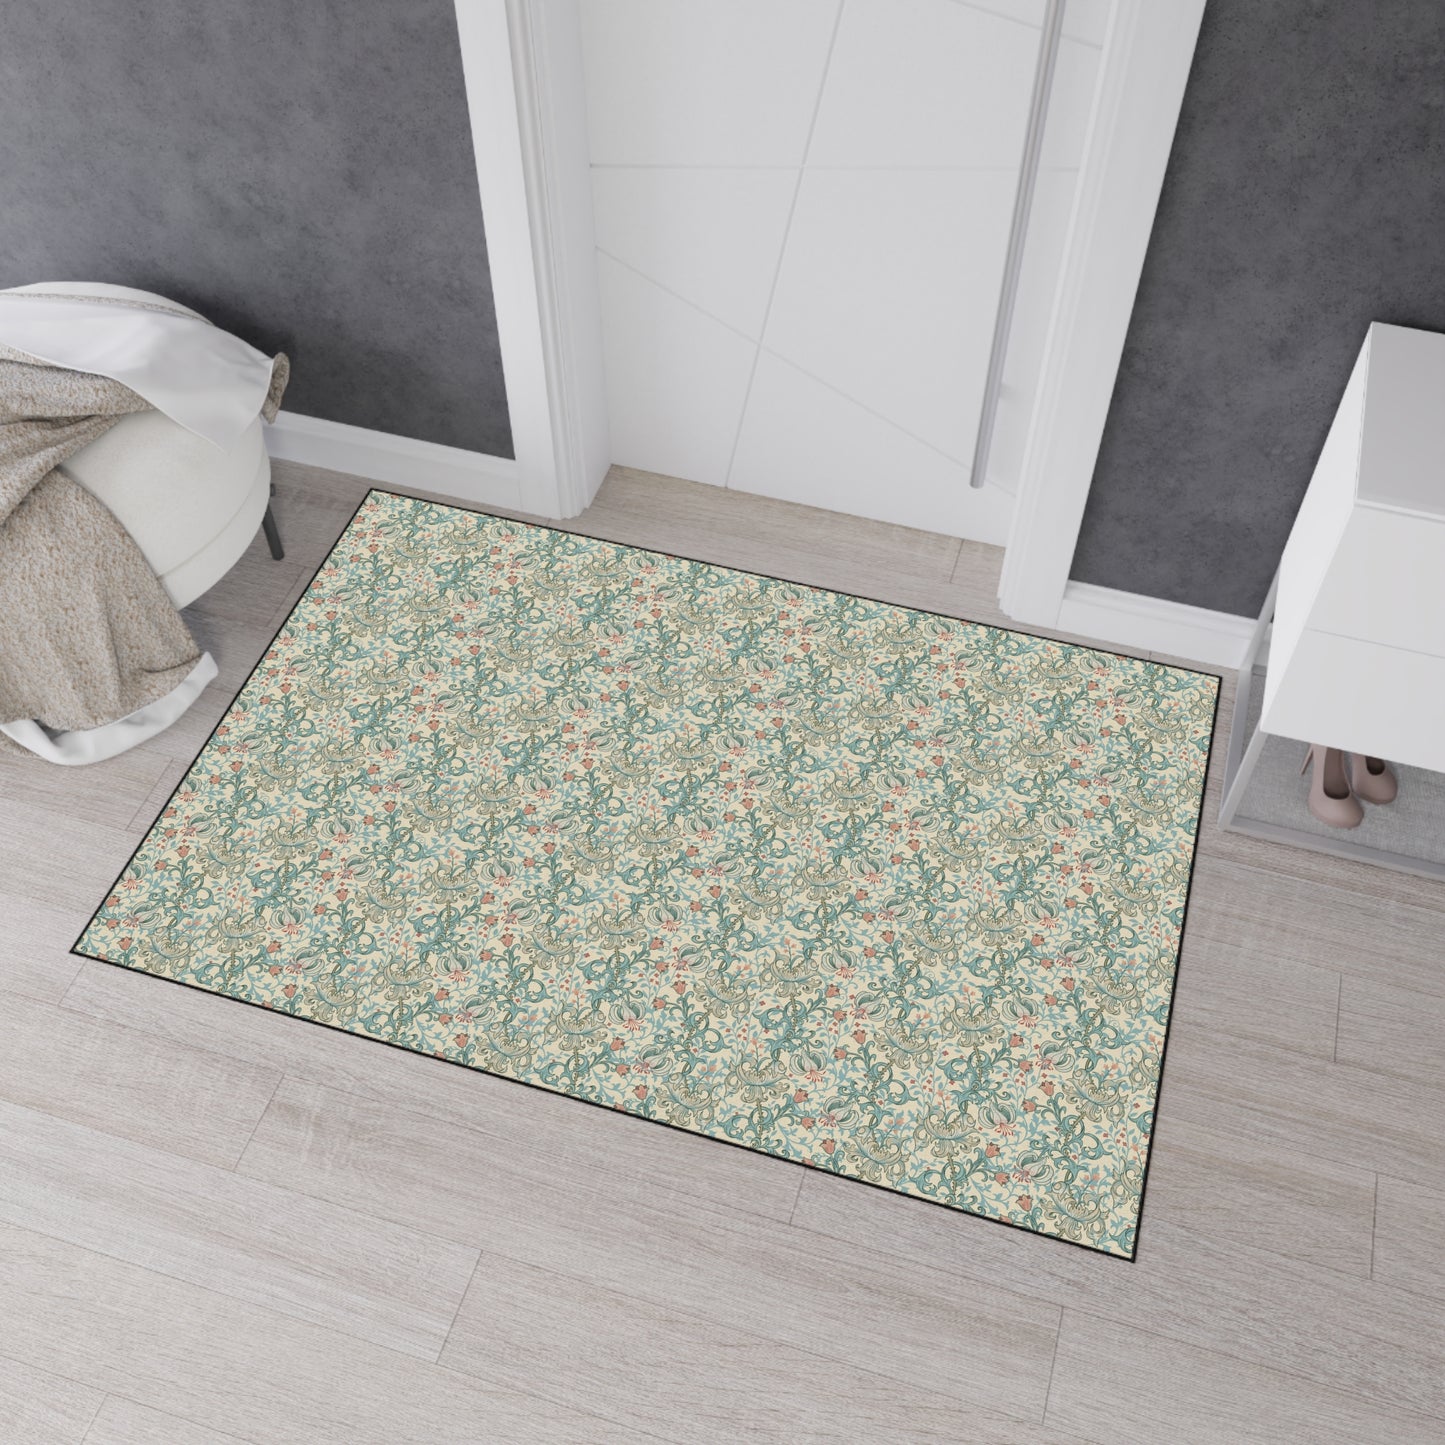 william-morris-co-heavy-duty-floor-mat-golden-lily-collection-mineral-9